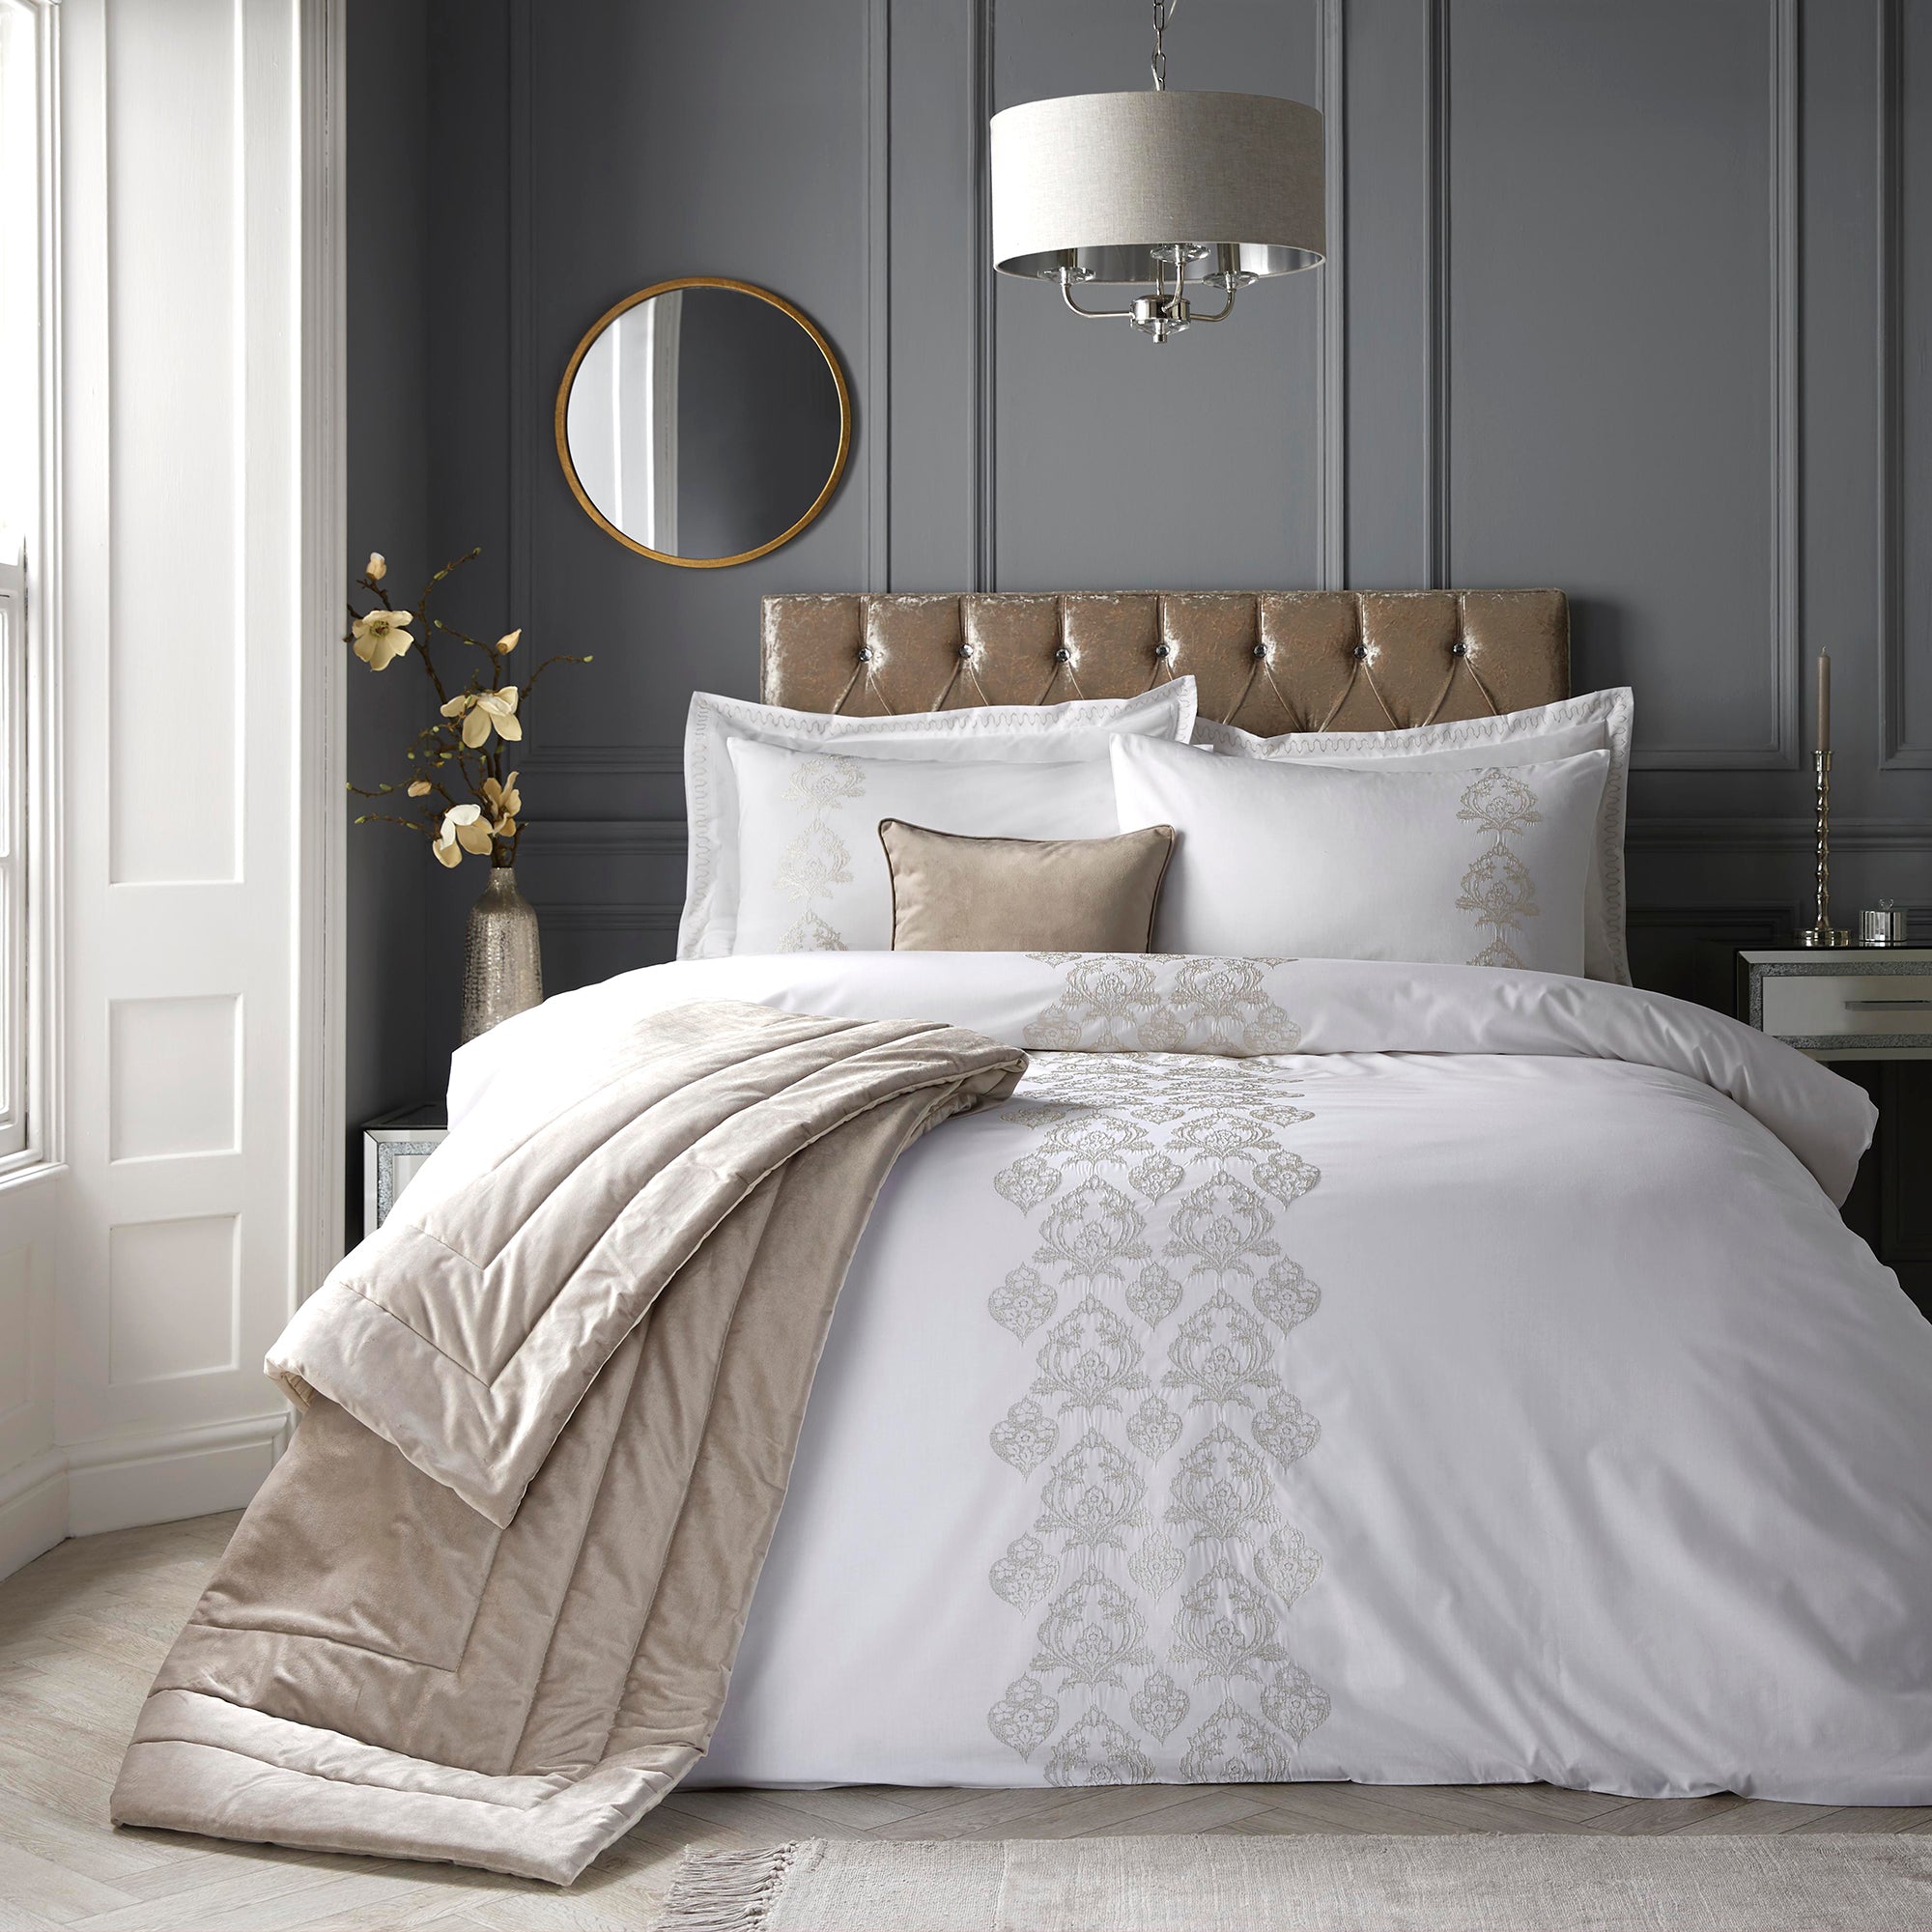 Carmella - Embroidered Duvet Cover Set in Natural by Laurence Llewelyn-Bowen